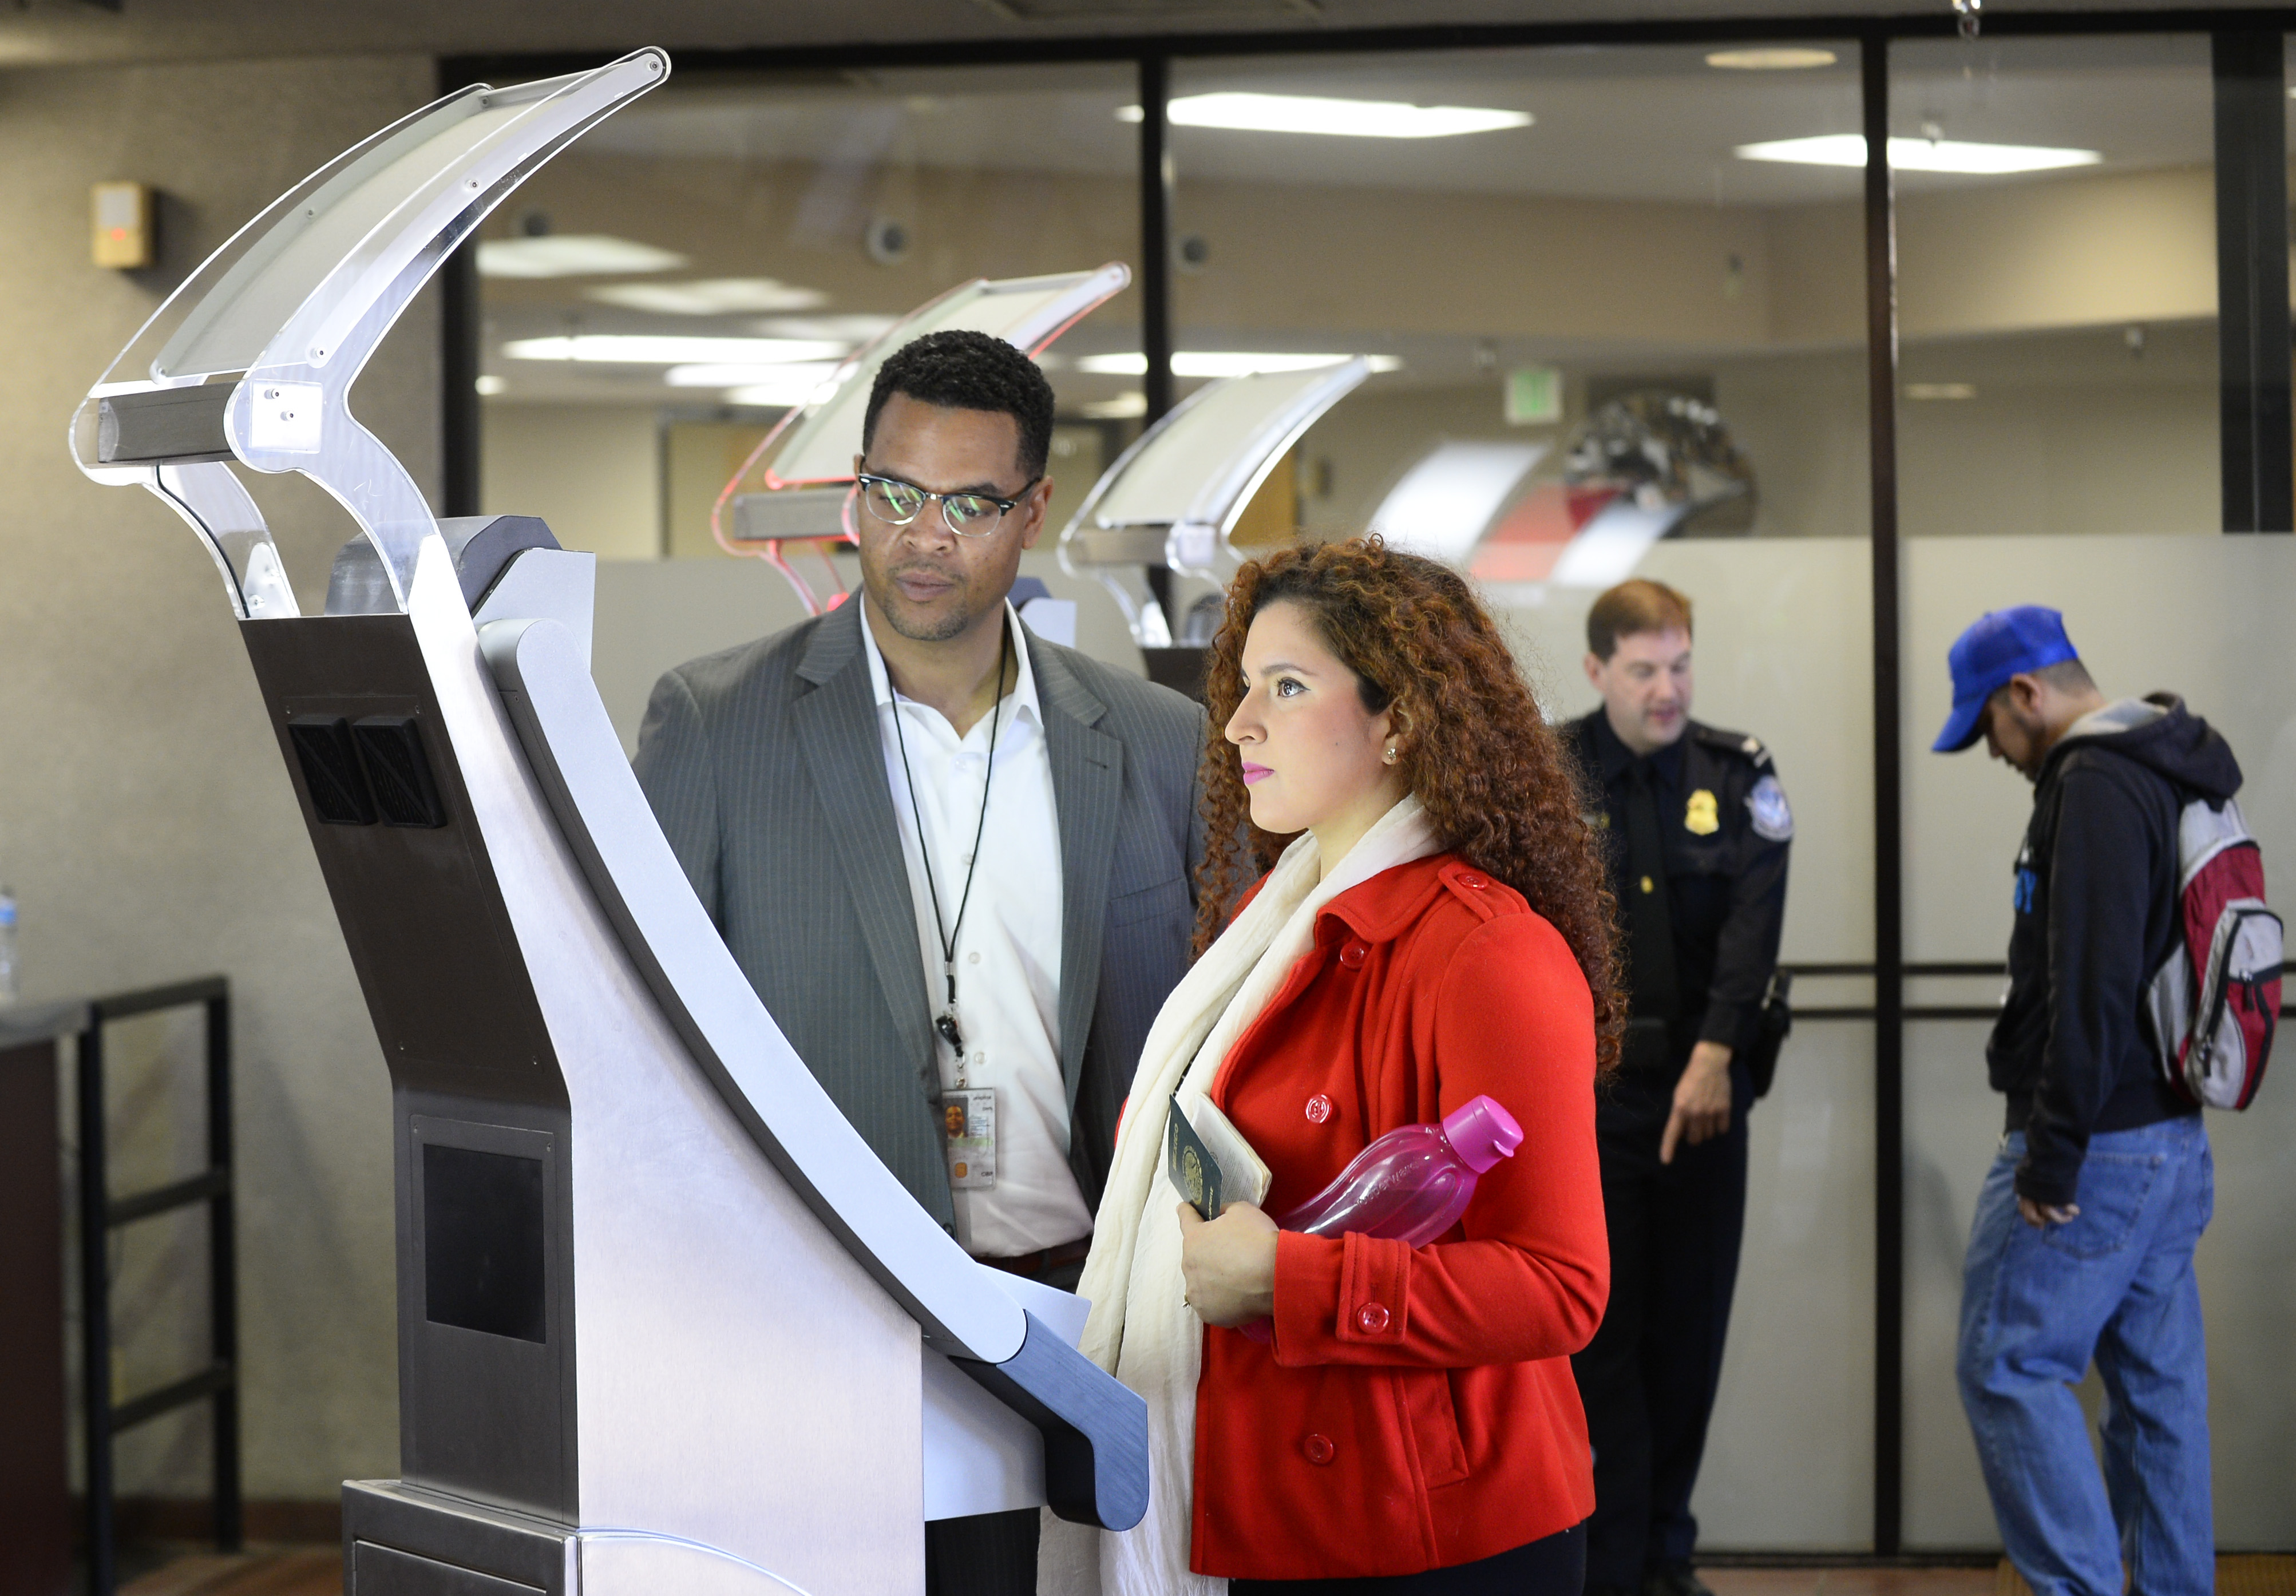 Contractor Dain Pettie, left, helps a pedestrian crossing from Mexico into the United States at the Otay Mesa Port of Entry have her facial features and eyes scanned at a biometric kiosk Thursday, Dec. 10, 2015, in San Diego. On Thursday, U.S. Customs and Border Protection began capturing facial and eye scans of foreigners entering the country at San Diego's Otay Mesa port of entry on foot. (AP Photo/Denis Poroy)